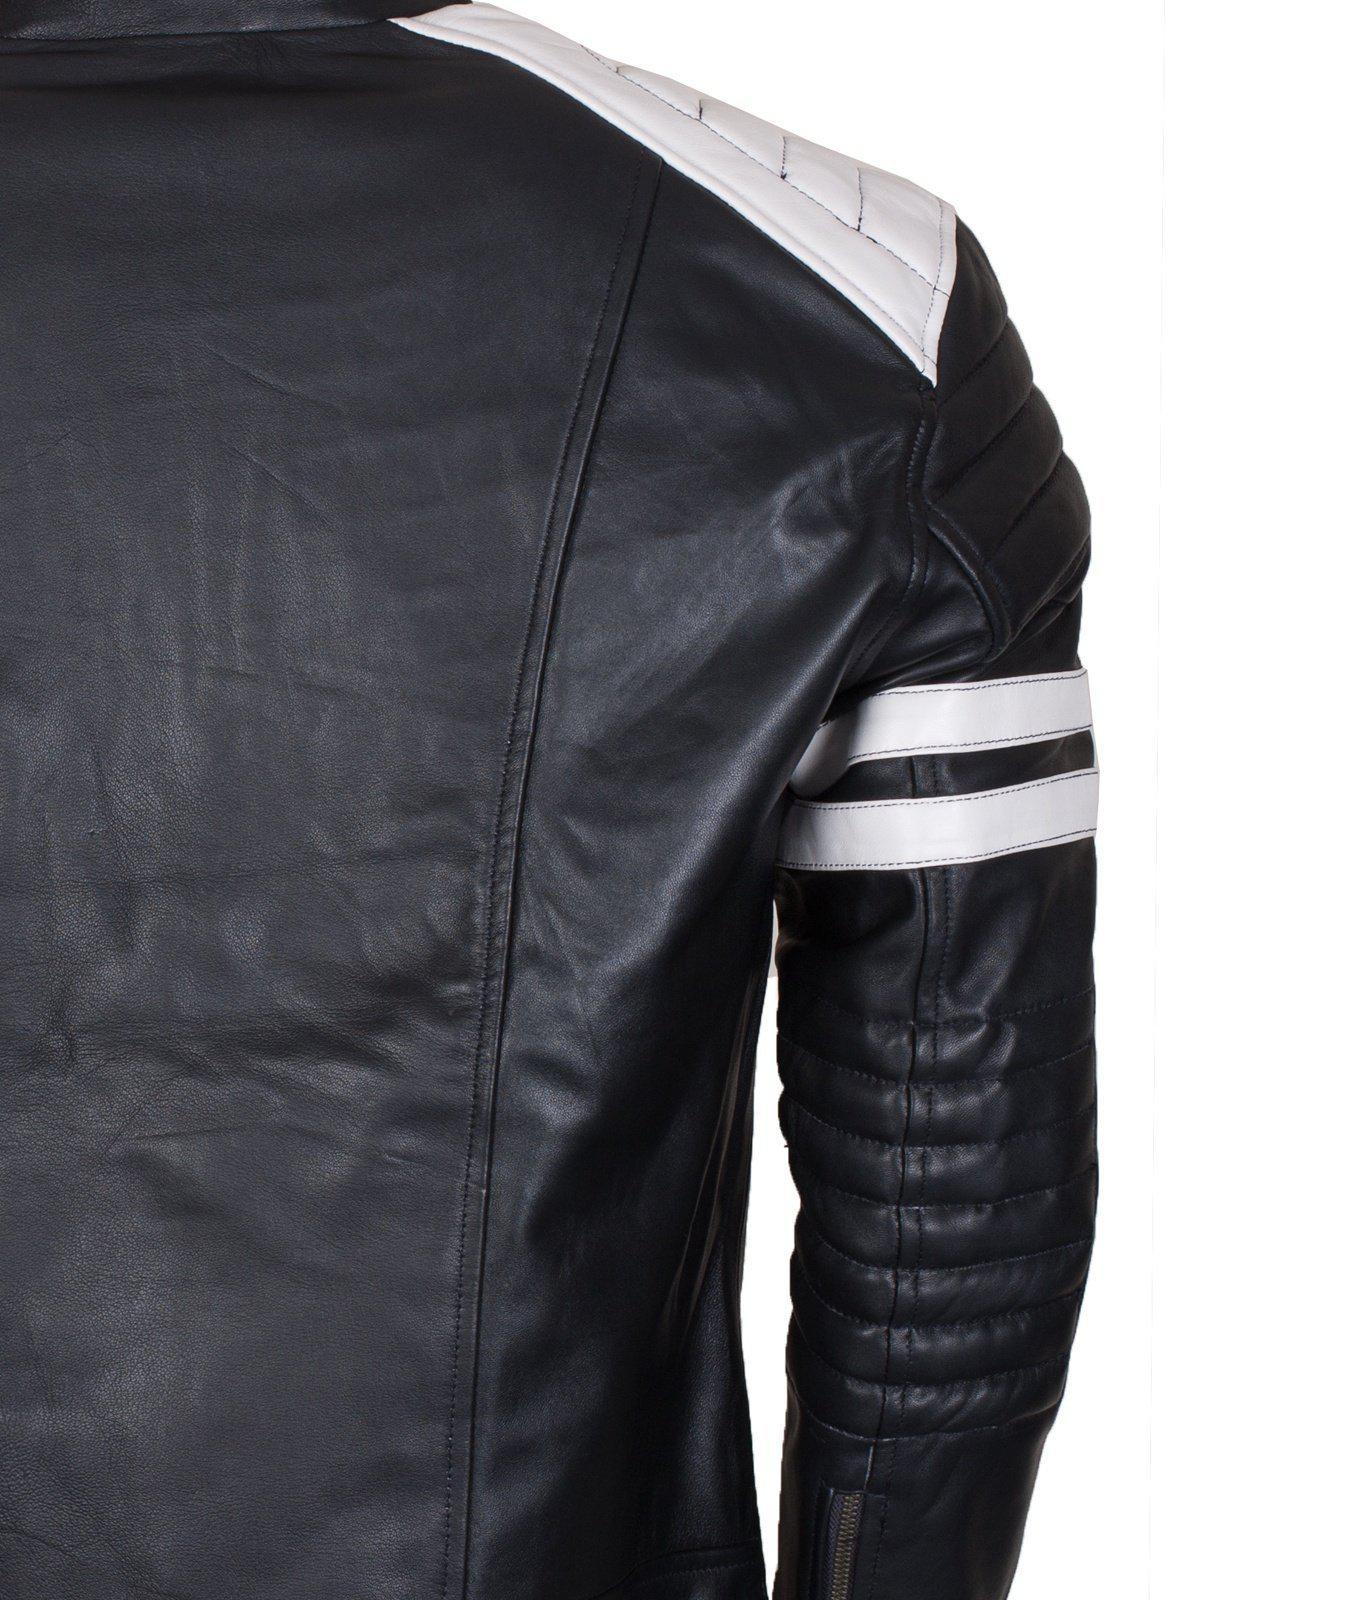 Riders and Bikers leather jacket black and white